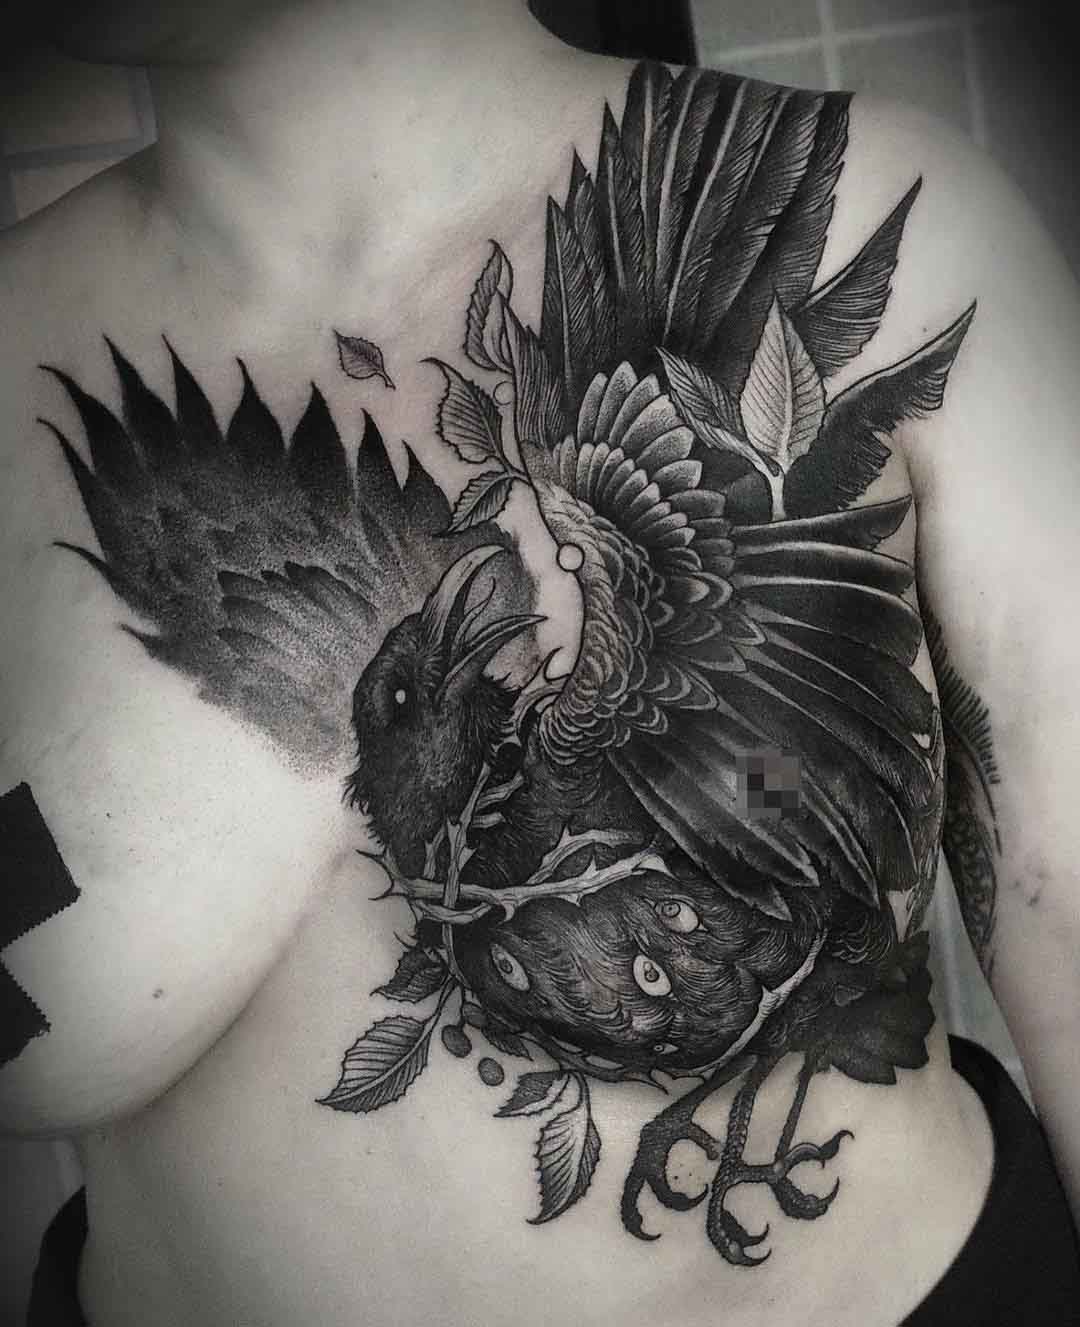 What do crows symbolize in tattoos? - Quora